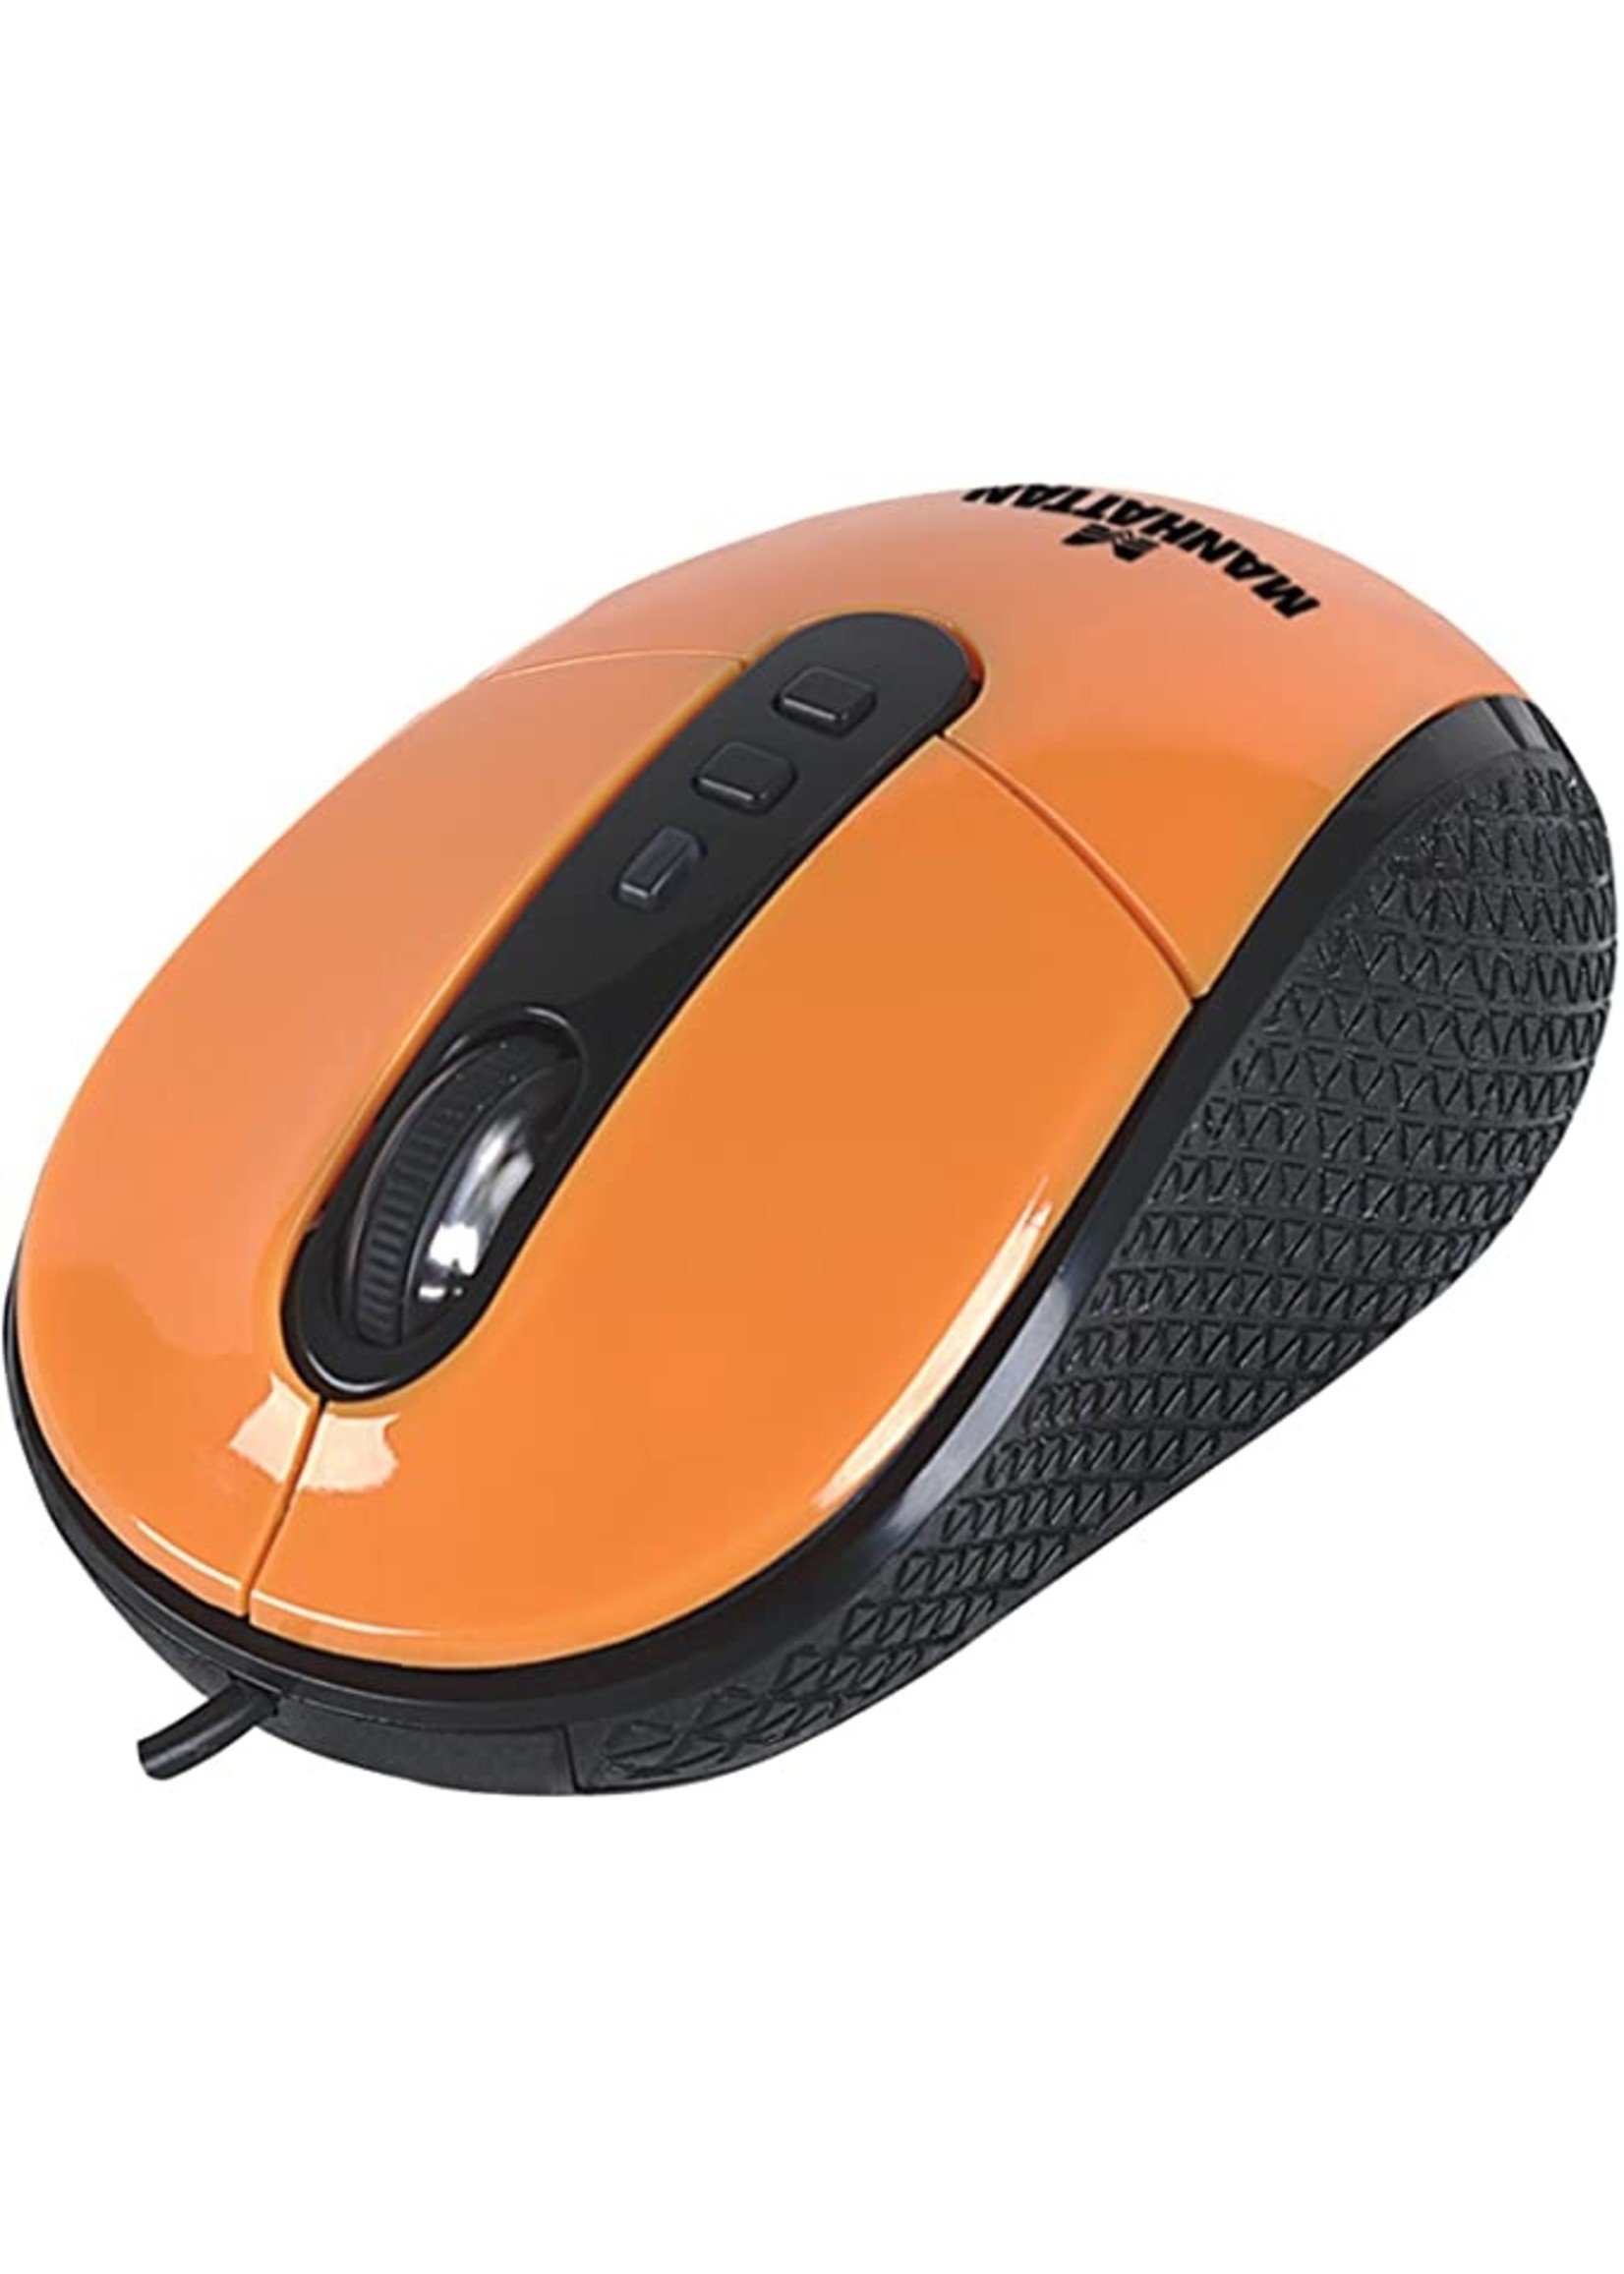 RightTrack Mouse Orange